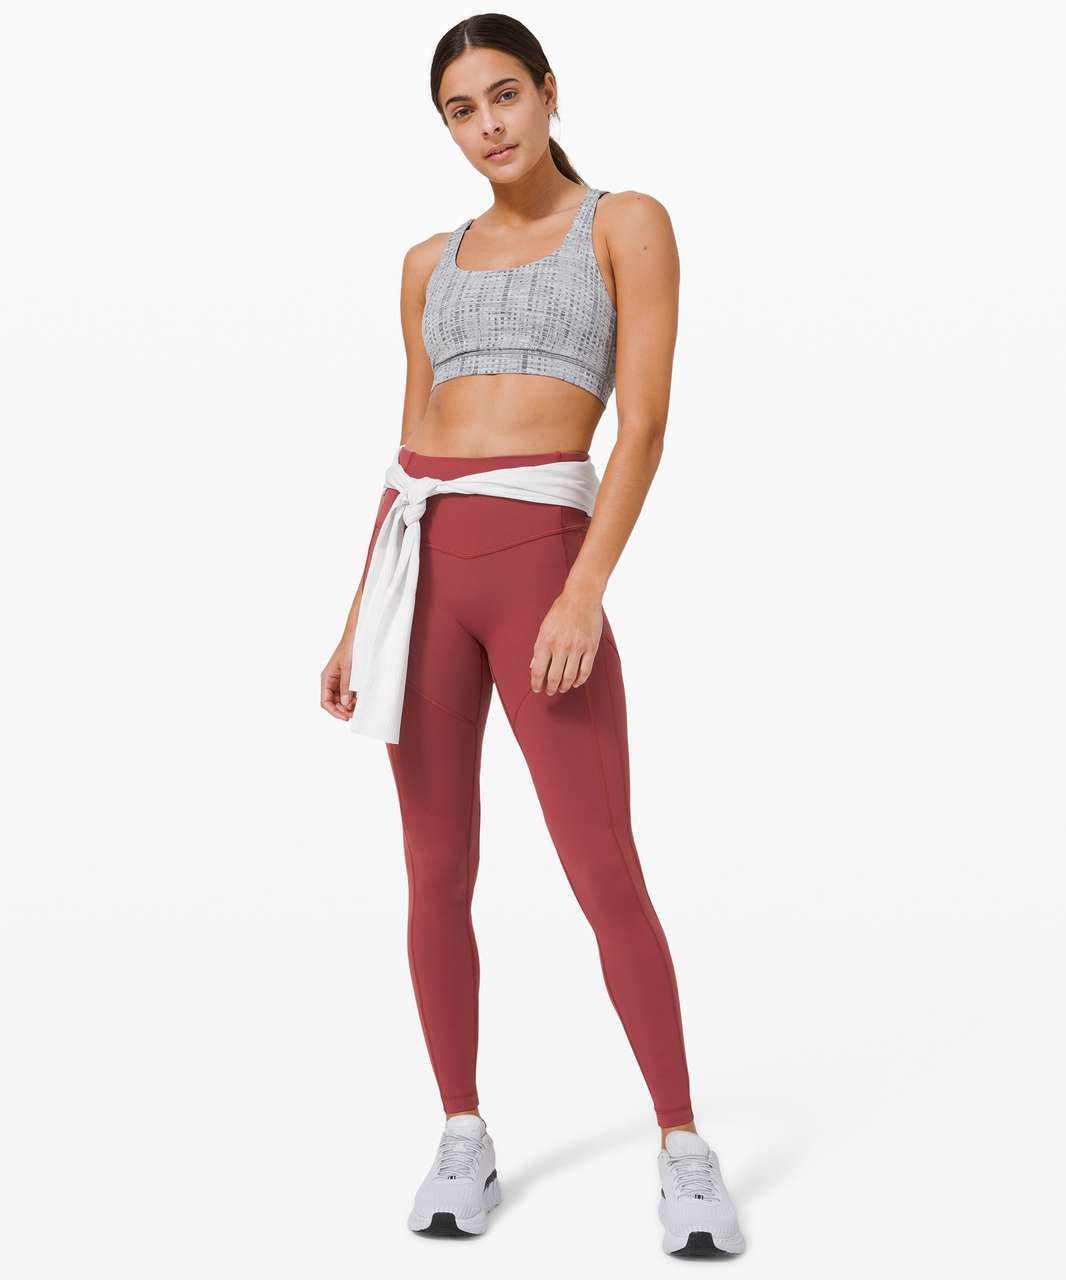 Lululemon All The Right Places Pant II 28